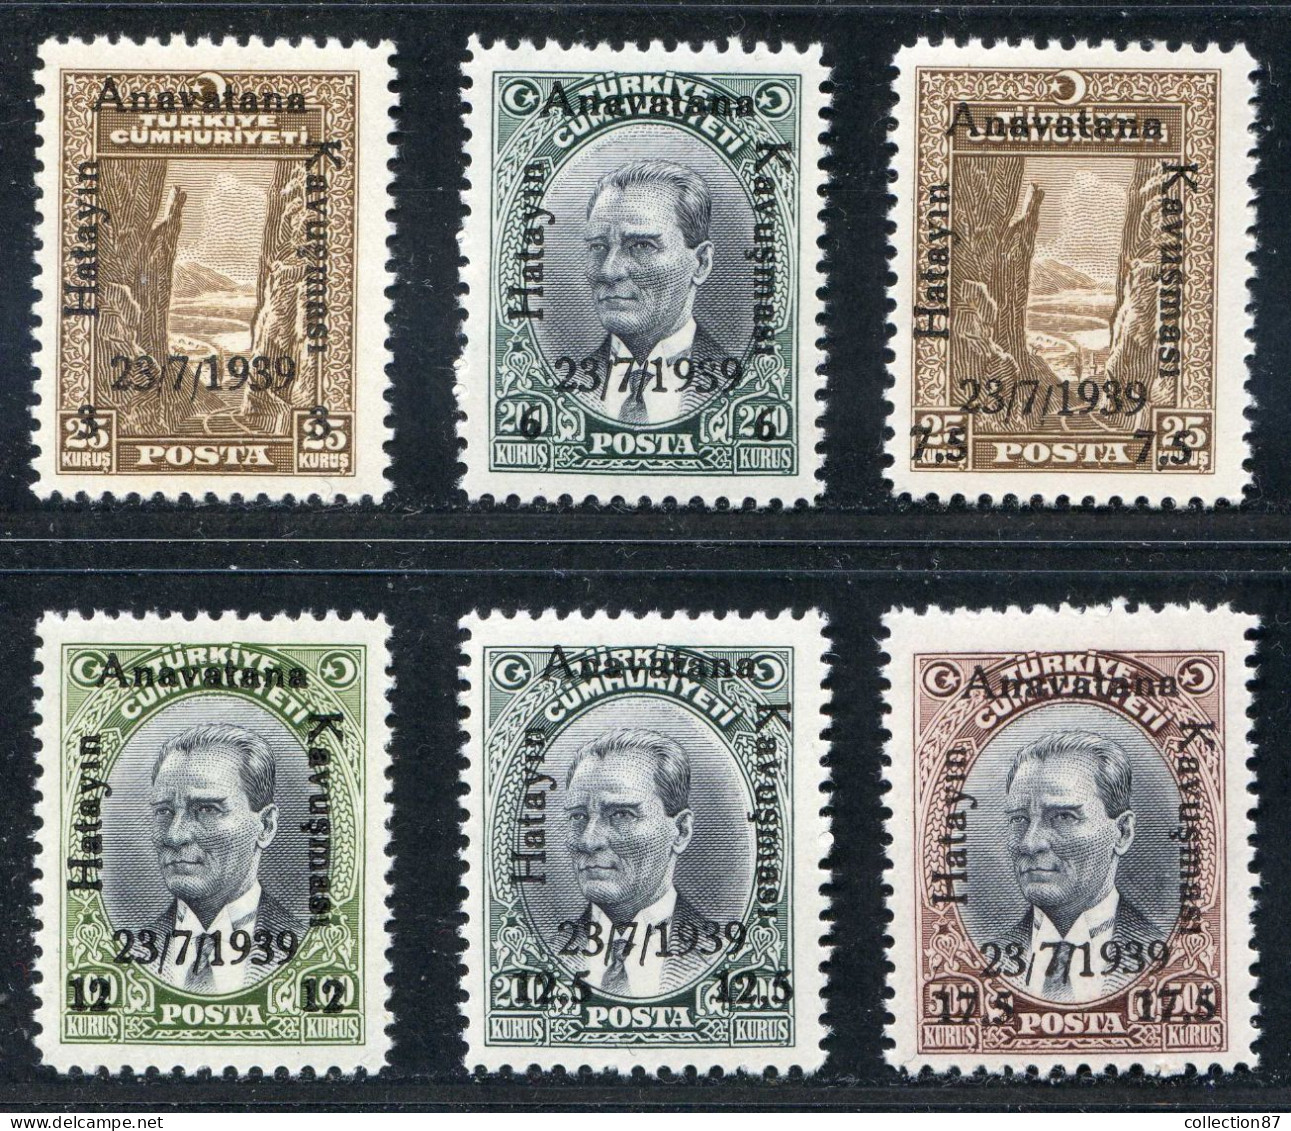 REF 091 > TURQUIE < Yv N° 912 à 917 * * < Neuf Luxe Dos Visible - MNH * *  Cat 9 € - Turkey - Unused Stamps